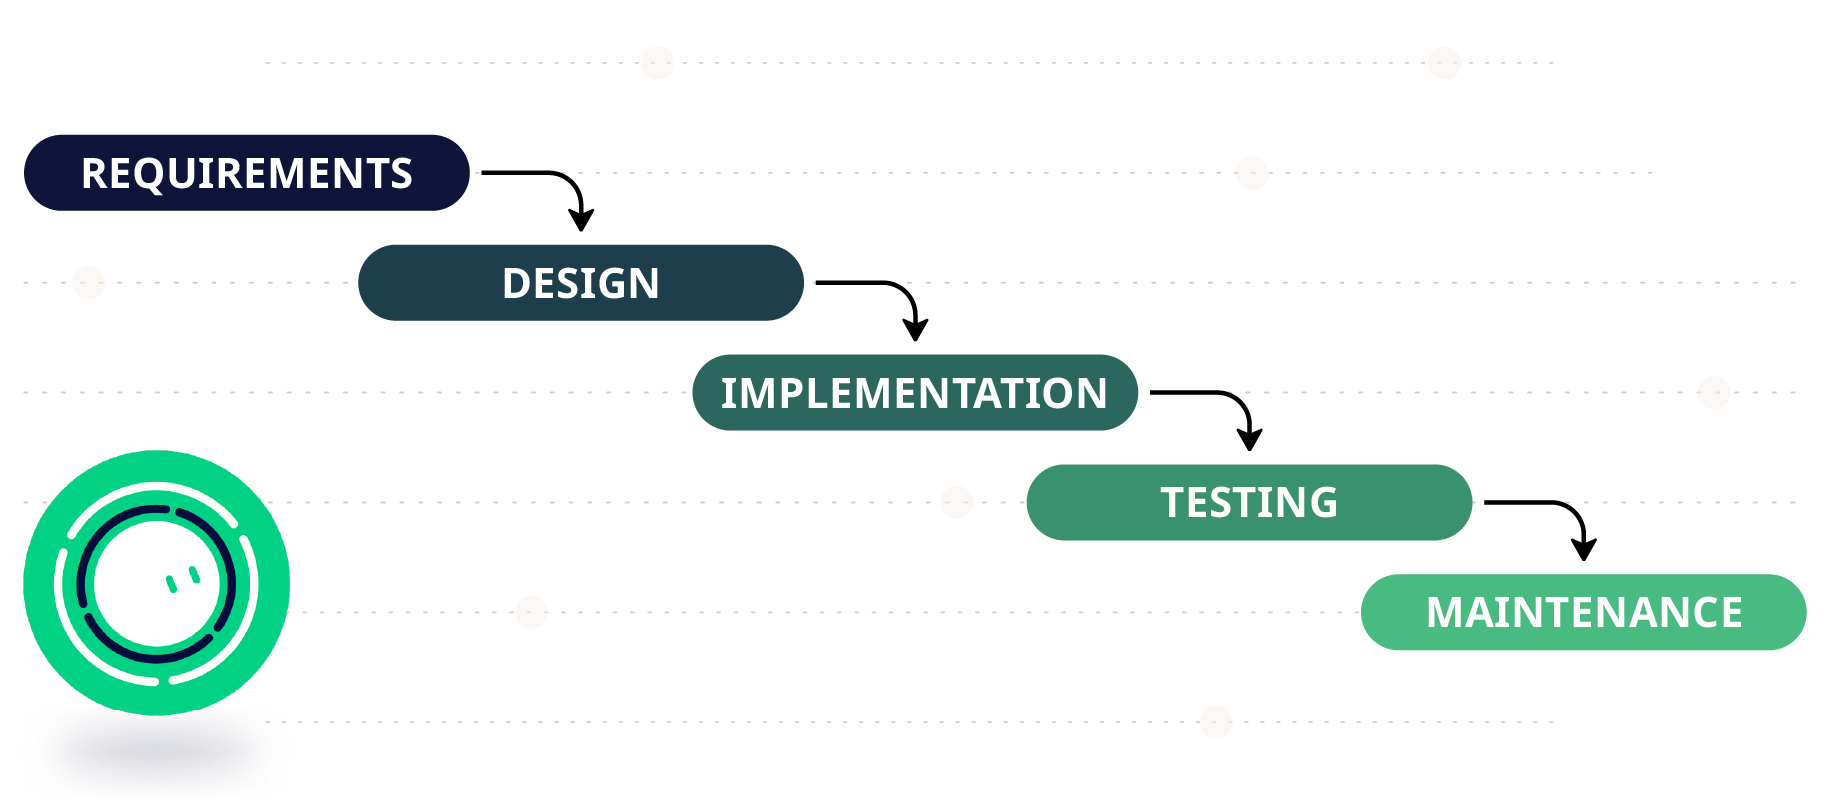 Agile and waterfall methodology in mobile app development